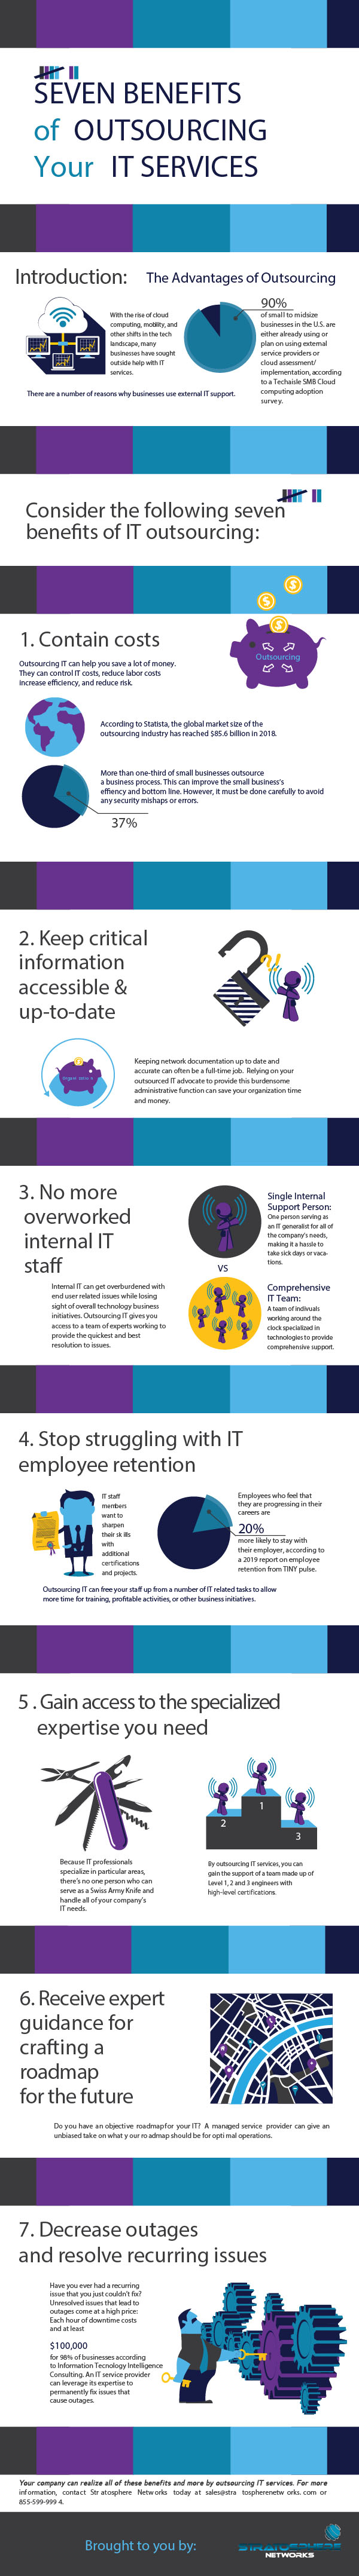 7 Benefits of Outsourcing Your IT